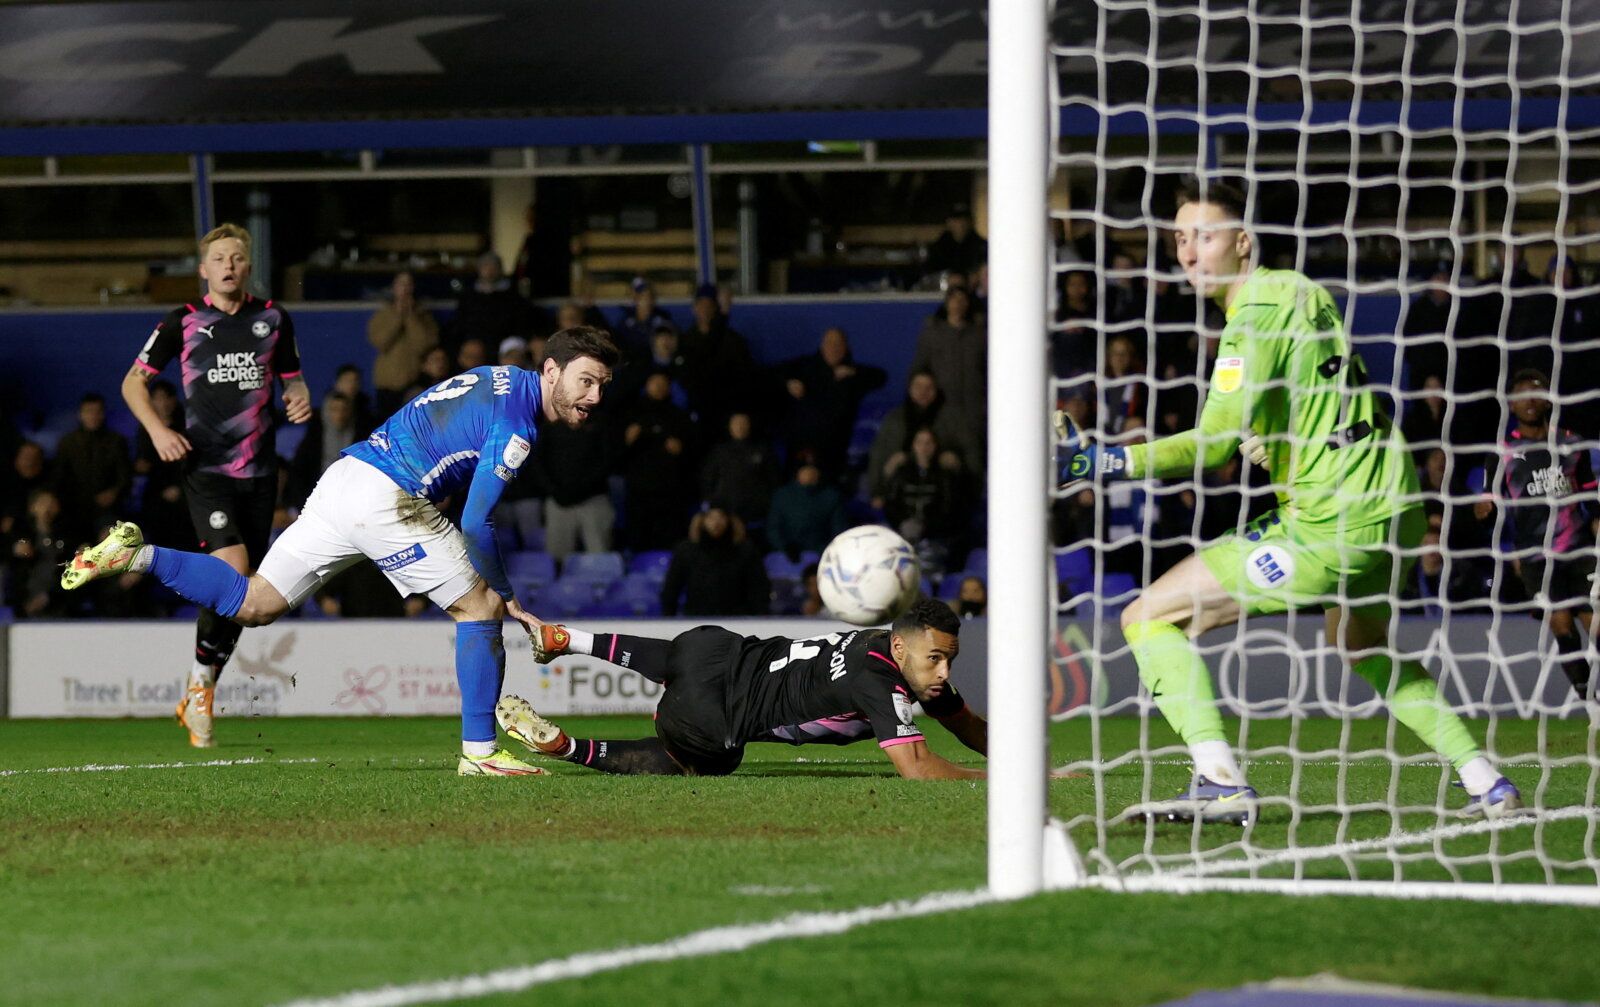 Soccer Football - Championship - Birmingham City v Peterborough United - St Andrew's, Birmingham, Britain - January 25, 2022 Birmingham City's Scott Hogan scores their second goal Action Images/Jason Cairnduff  EDITORIAL USE ONLY. No use with unauthorized audio, video, data, fixture lists, club/league logos or 